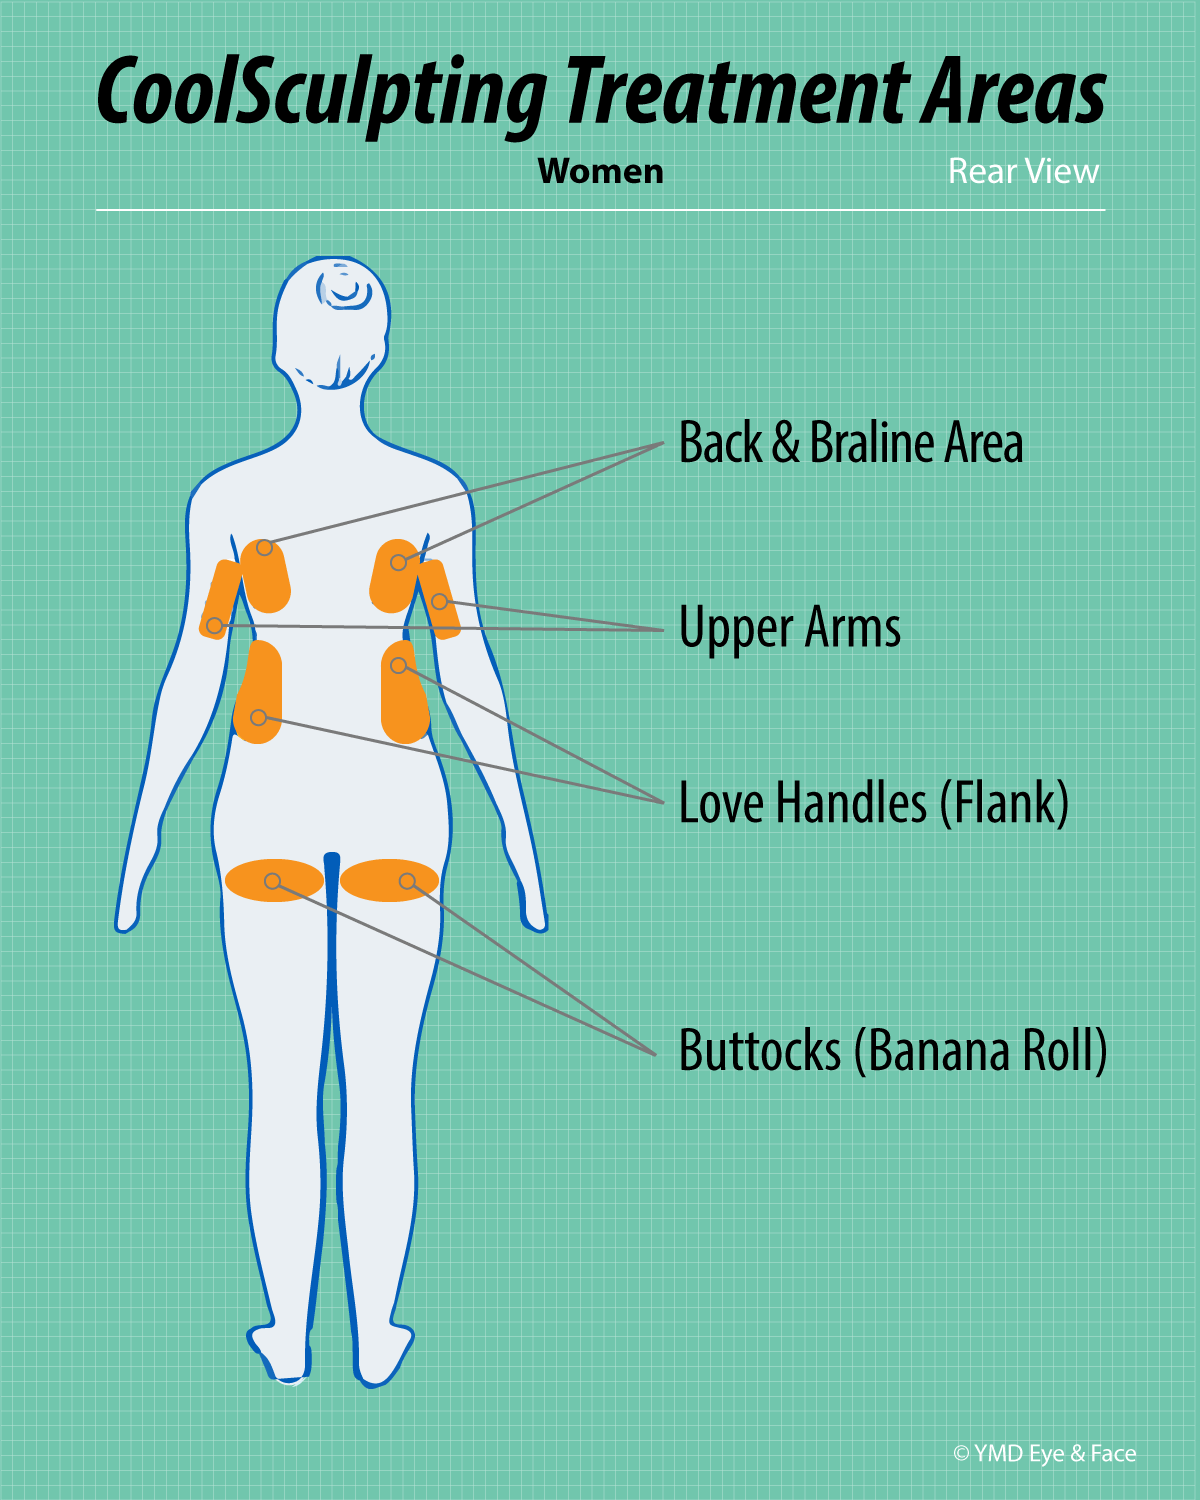 CoolSculpting graphic highlighting possible treatment areas for women (rear view): back and braline fat, upper arms, love handles (flanks), buttocks (banana roll)